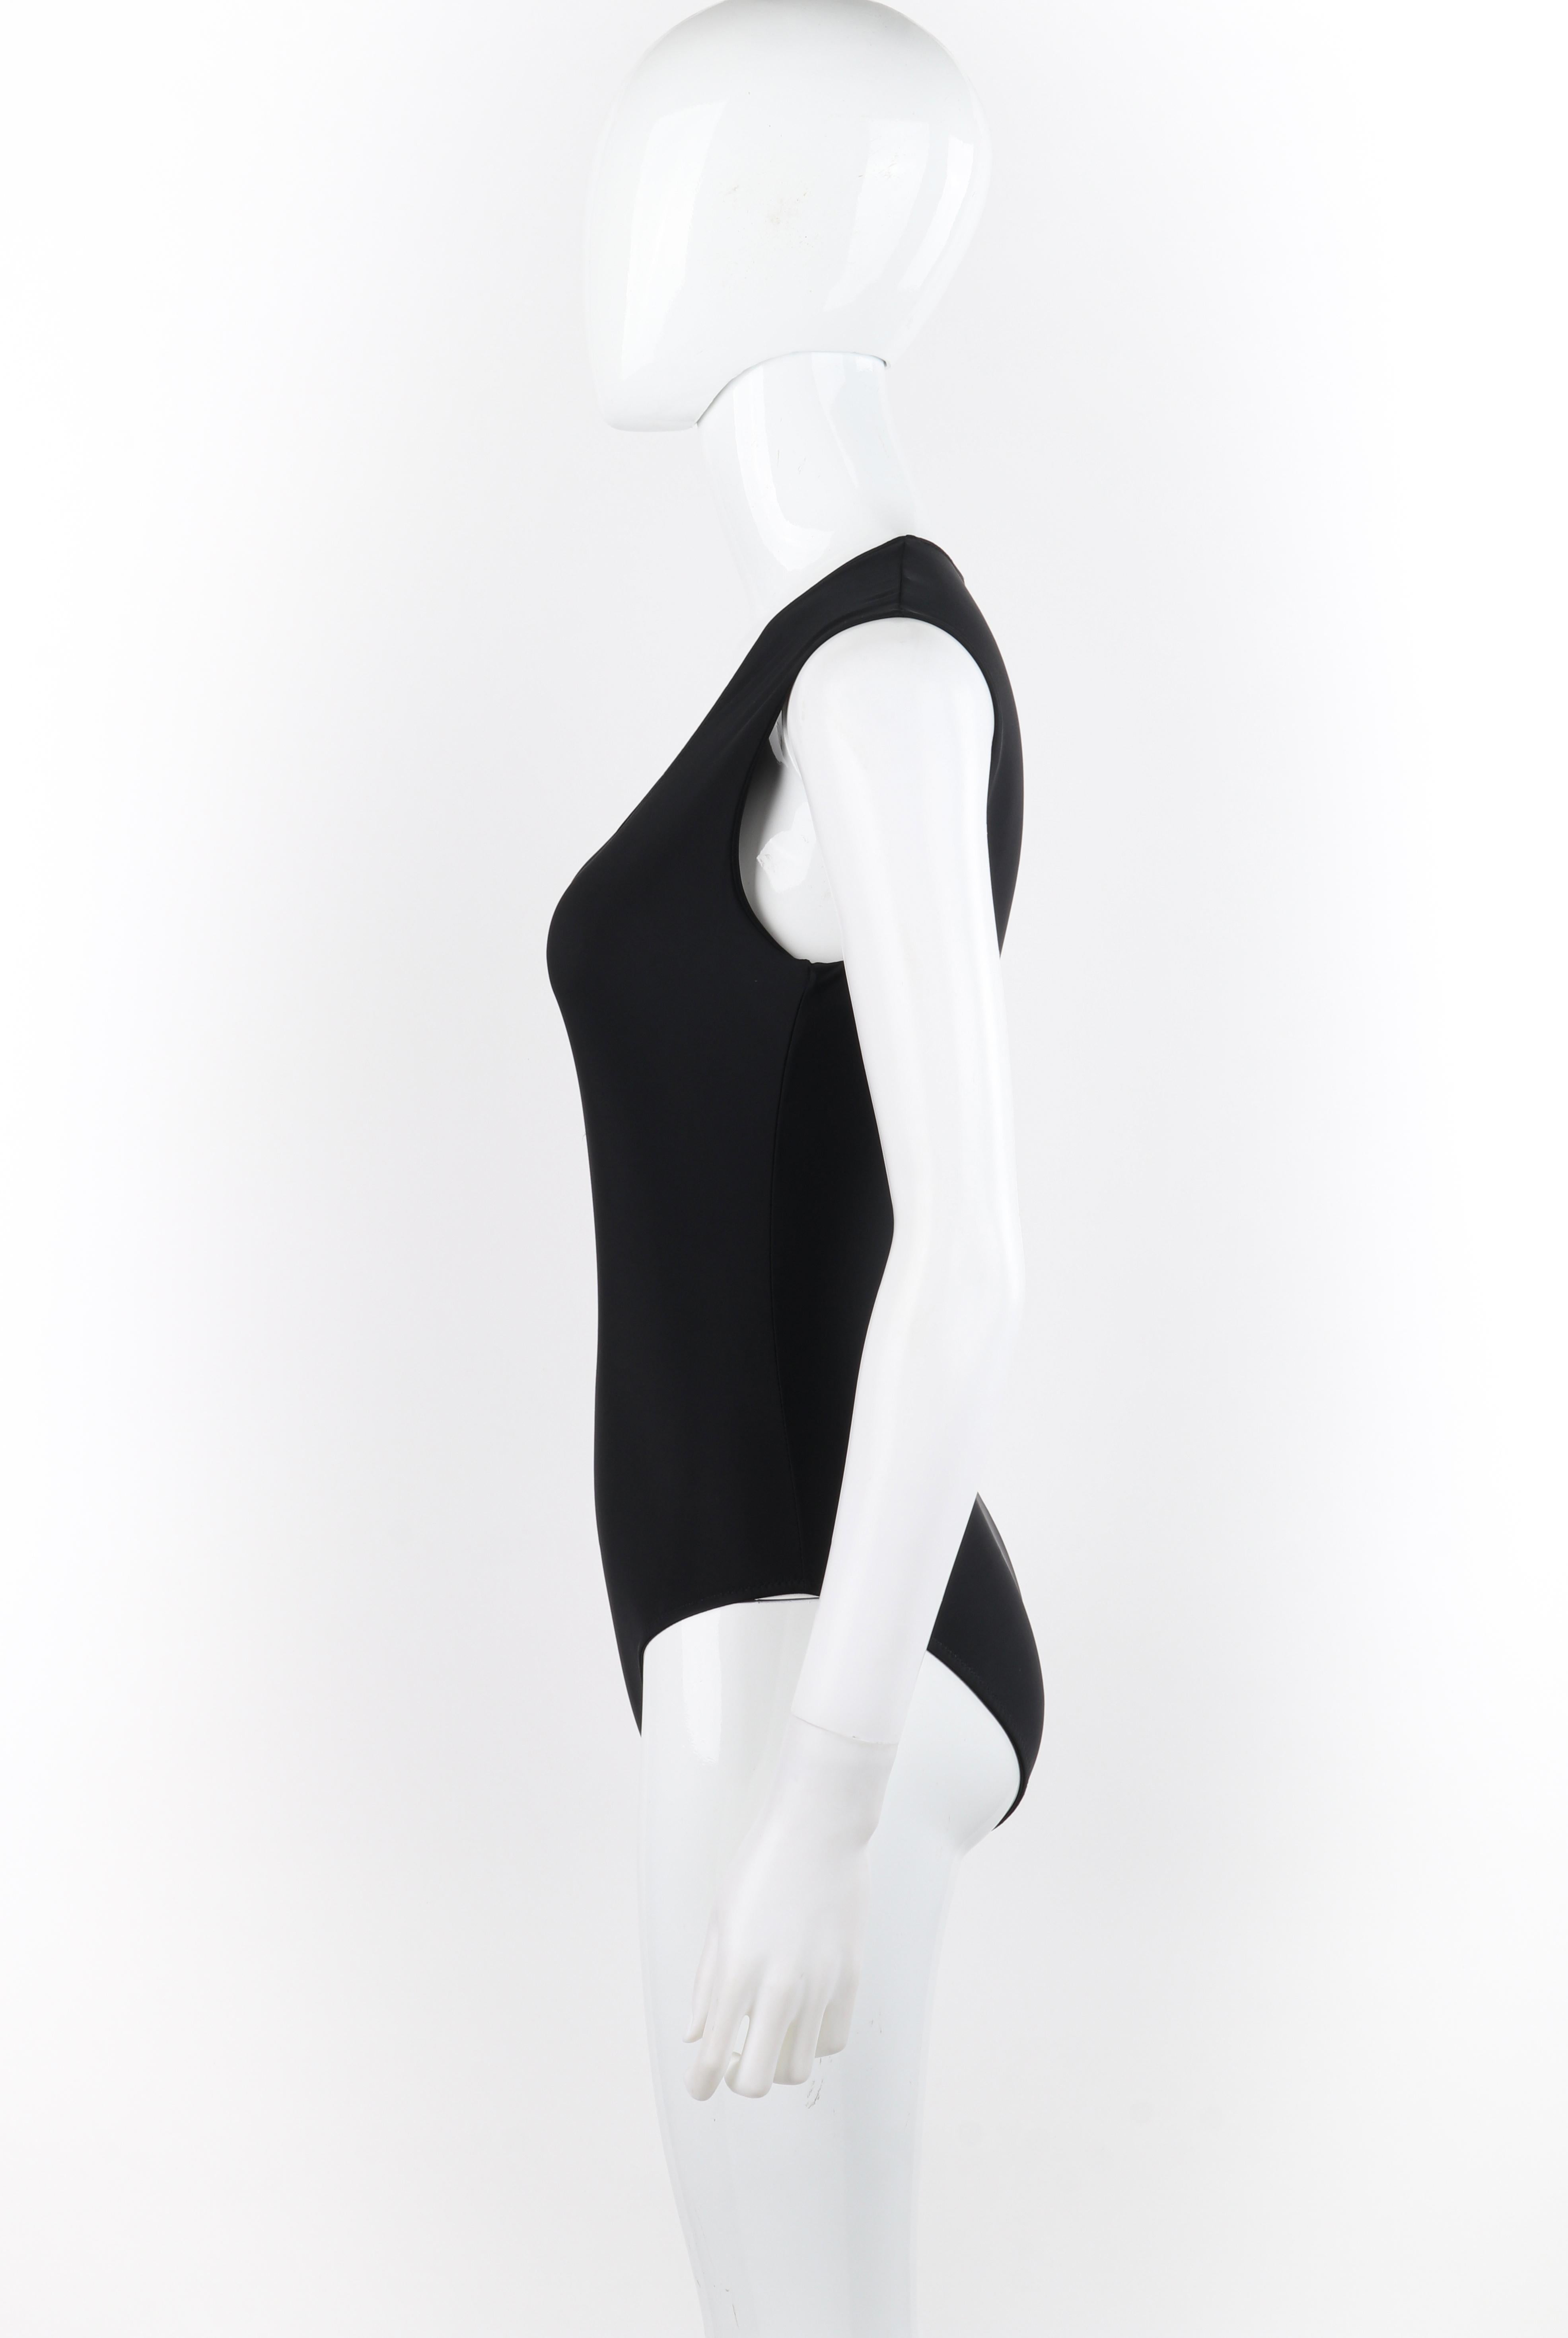 GIVENCHY COUTURE c.1998 ALEXANDER McQUEEN Black Stretch Scoop Neck Bodysuit In Good Condition For Sale In Thiensville, WI